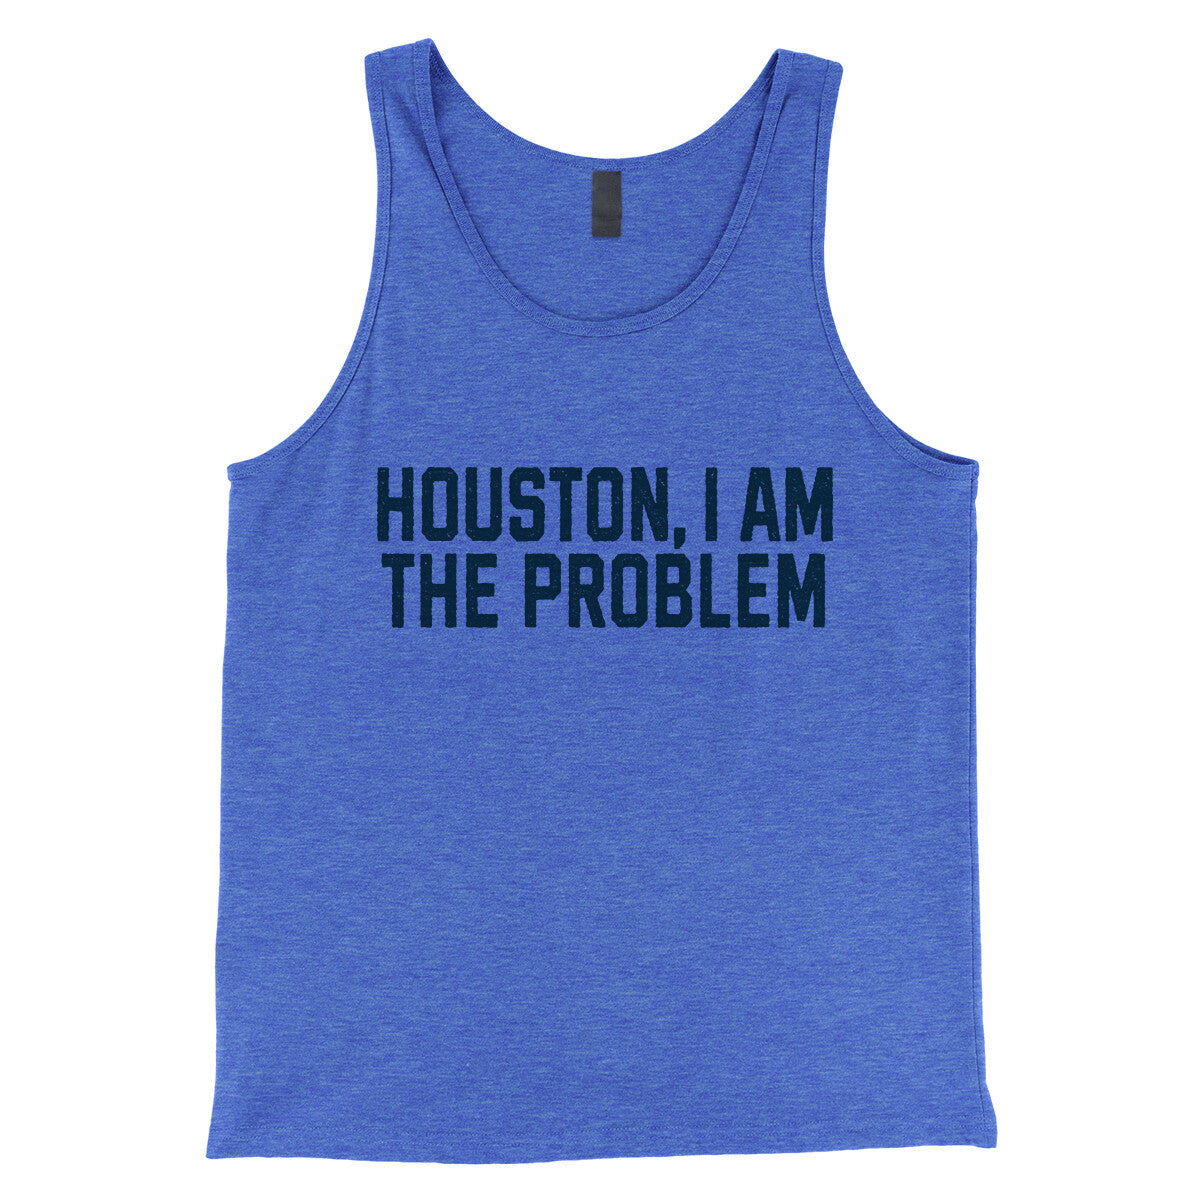 Houston I Am the Problem in True Royal TriBlend Color